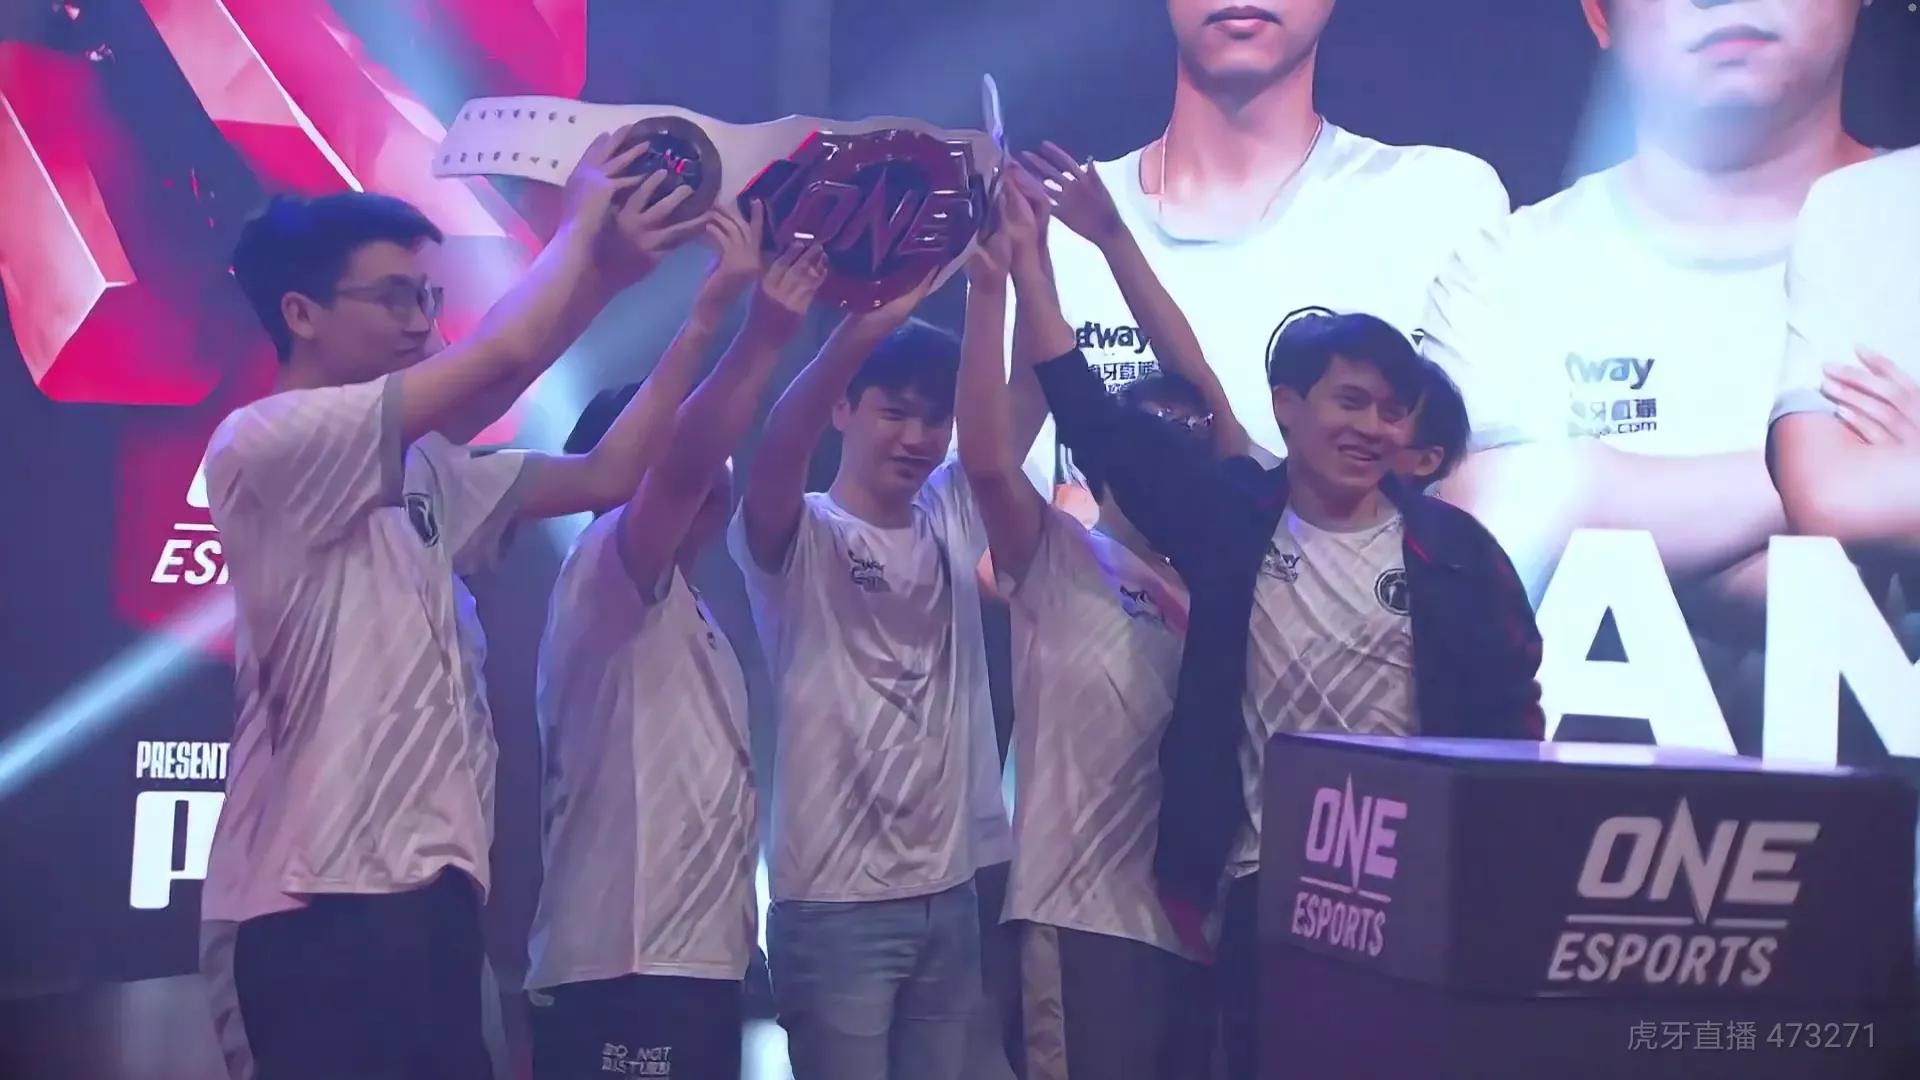 Singapore Major:IG lets 2 chase after 3 conquer EG to win championship